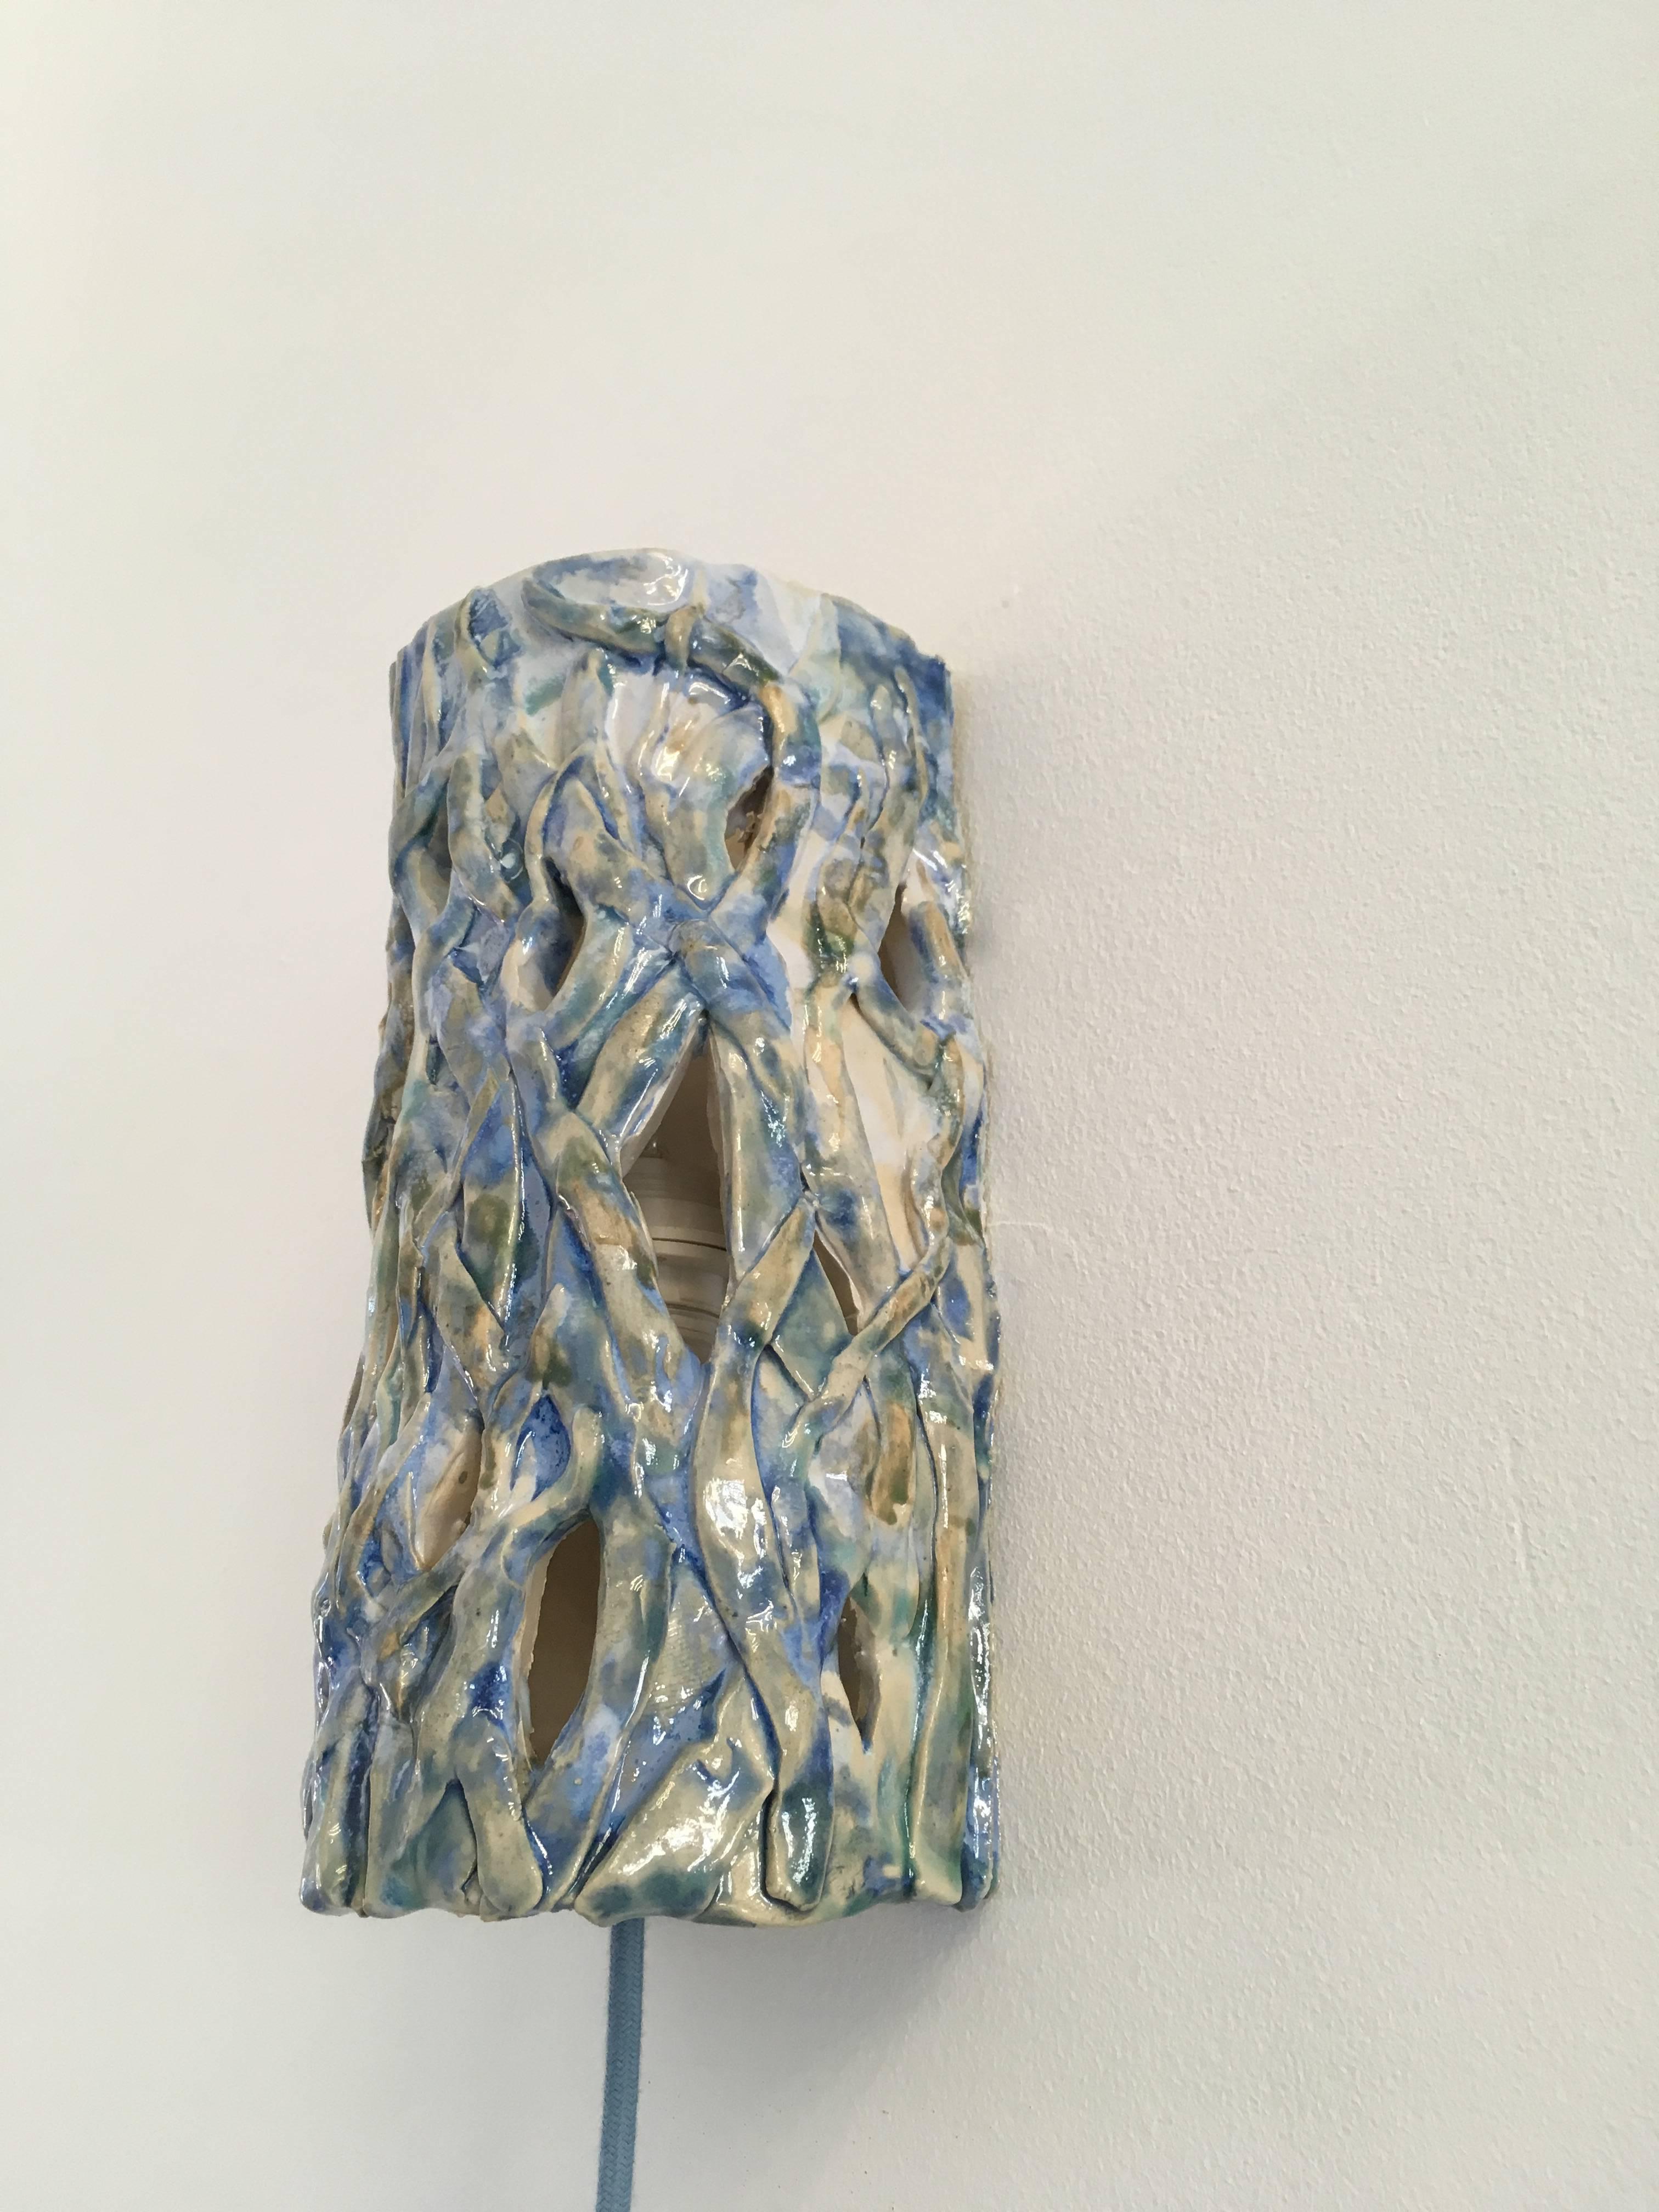 French Contemporary Handmade Blue Ceramic Wall Lamp 'Chez Albert 2' For Sale